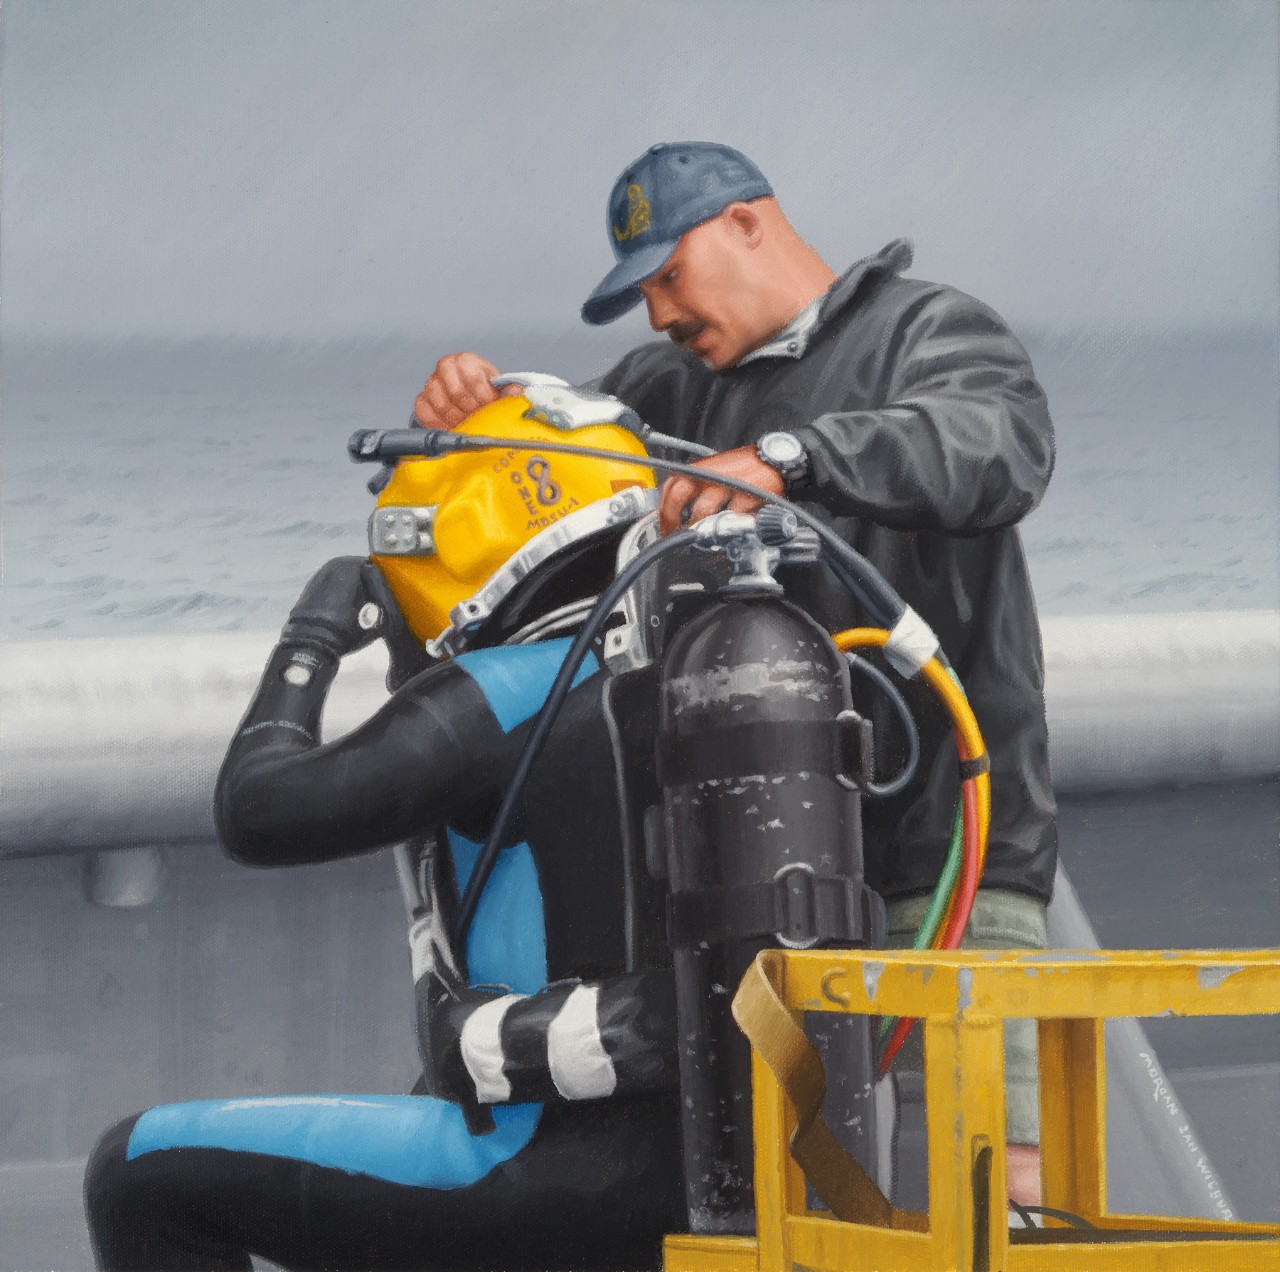 A man in a ball cap and a jacket is helping a diver with his gear